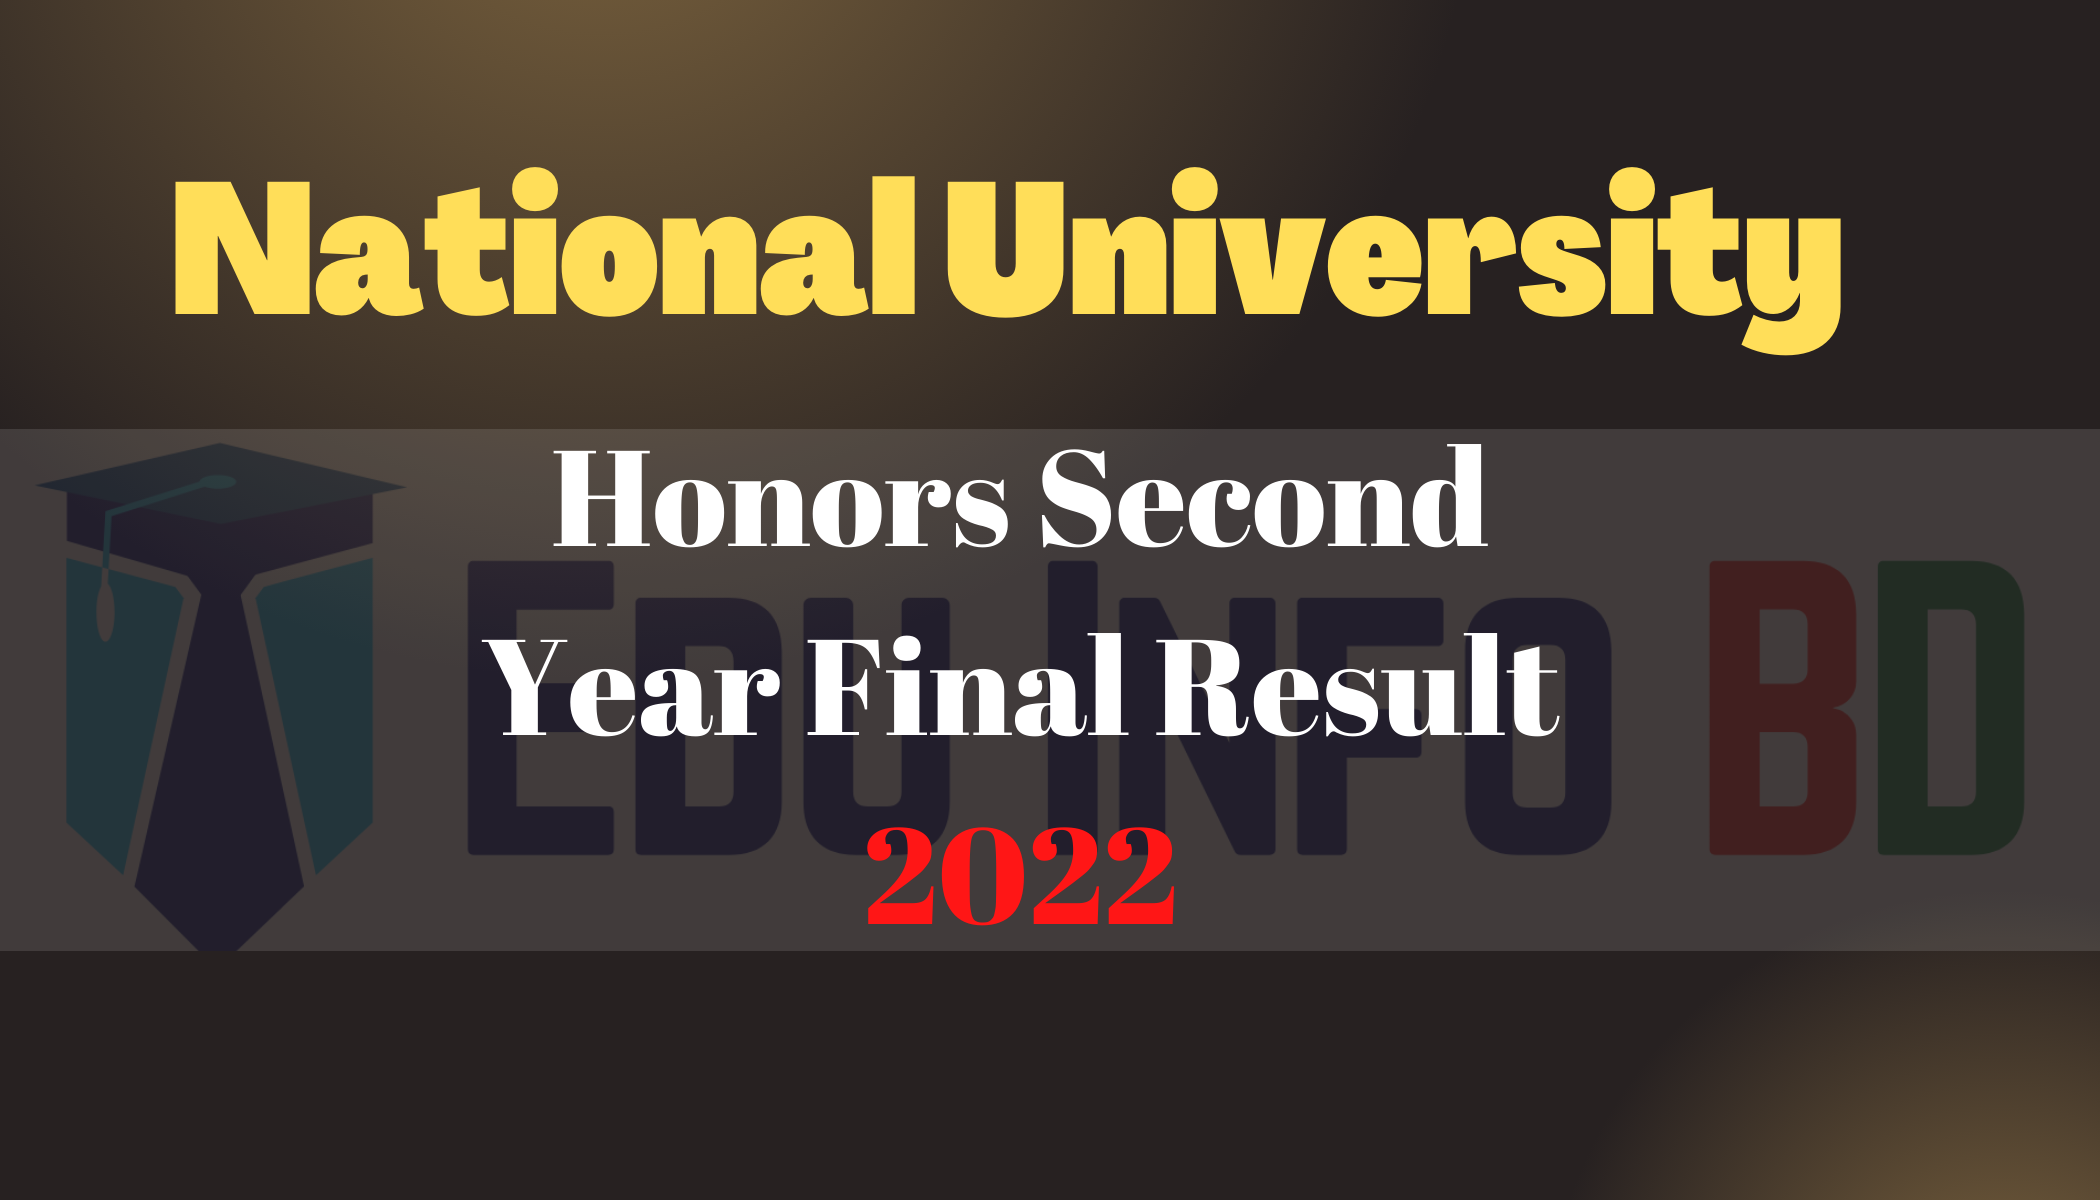 Honors Second Year Final Result 2022